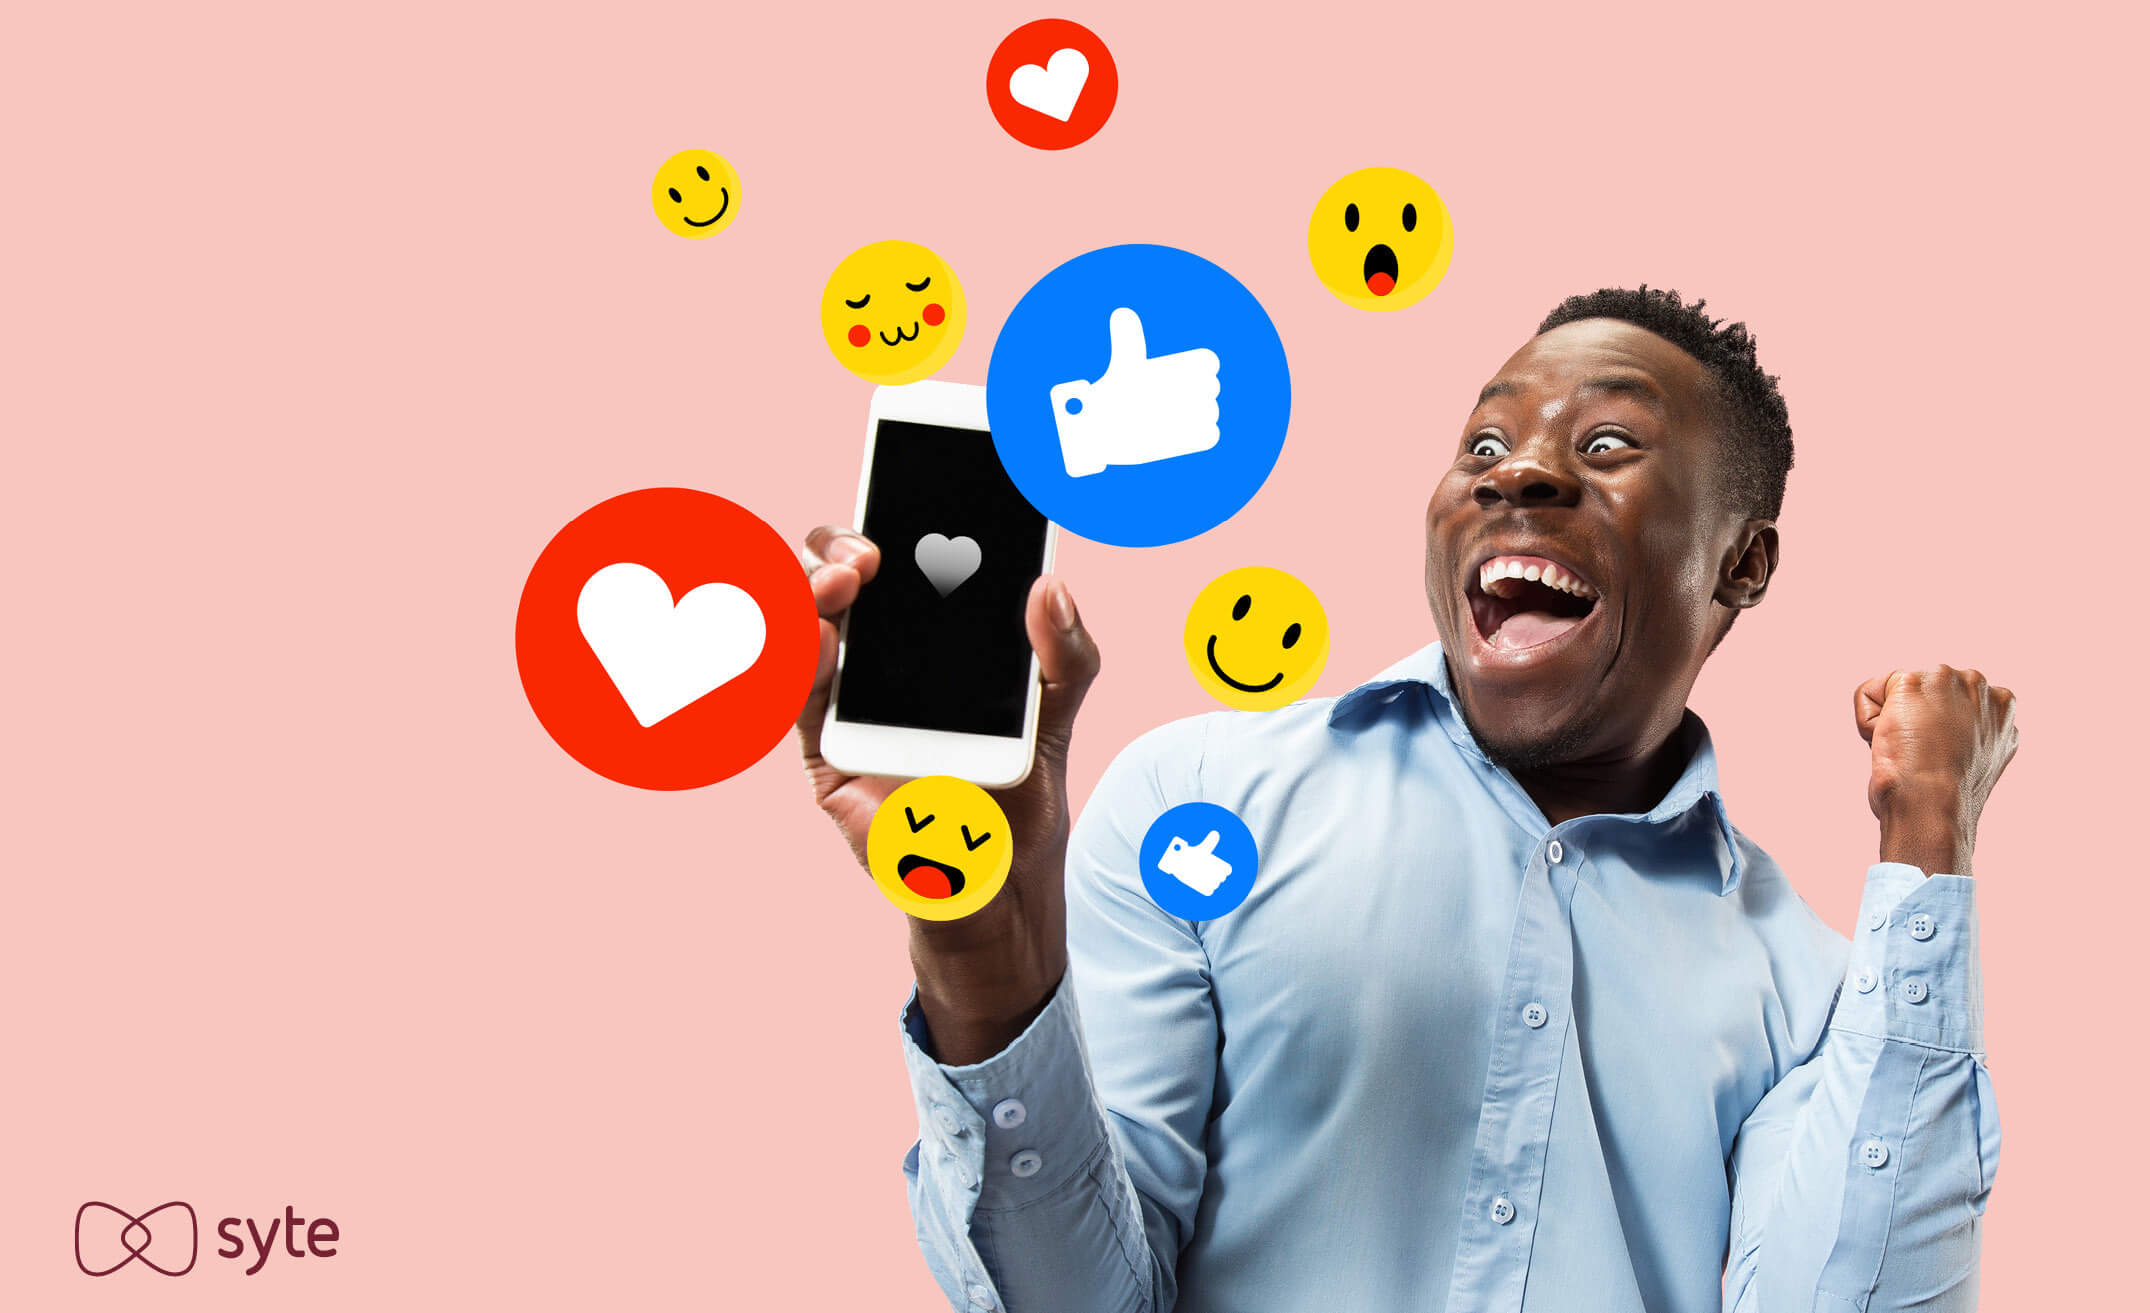 social media and exclusivity for eCommerce expressed through emojis and a man holding a phone